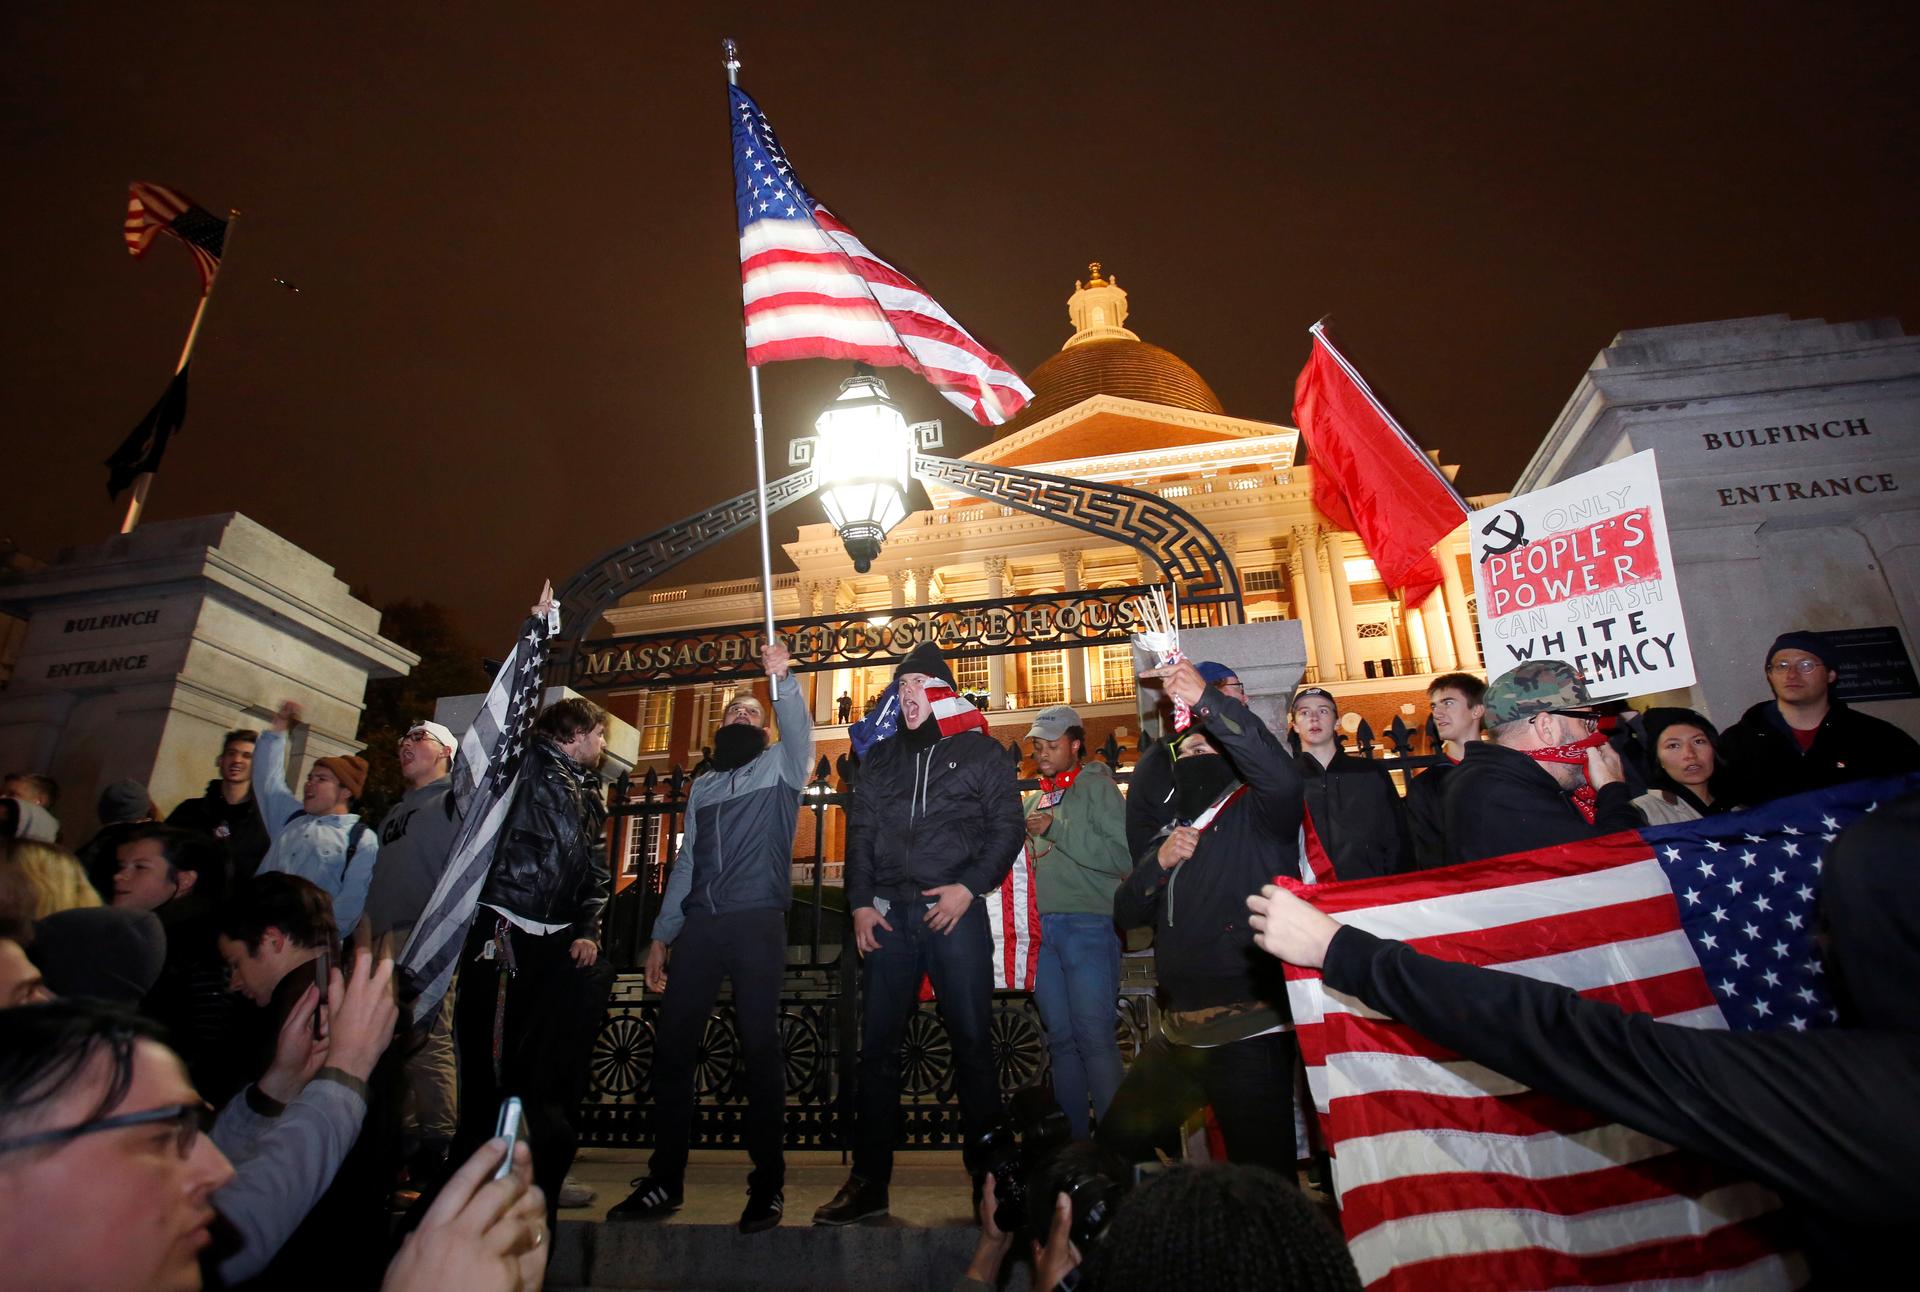 Protesters stand on the state house steps during a march in opposition to the election of Republican Donald Trump as President of the United States in Boston, Massachusetts, U.S. November 9, 2016.